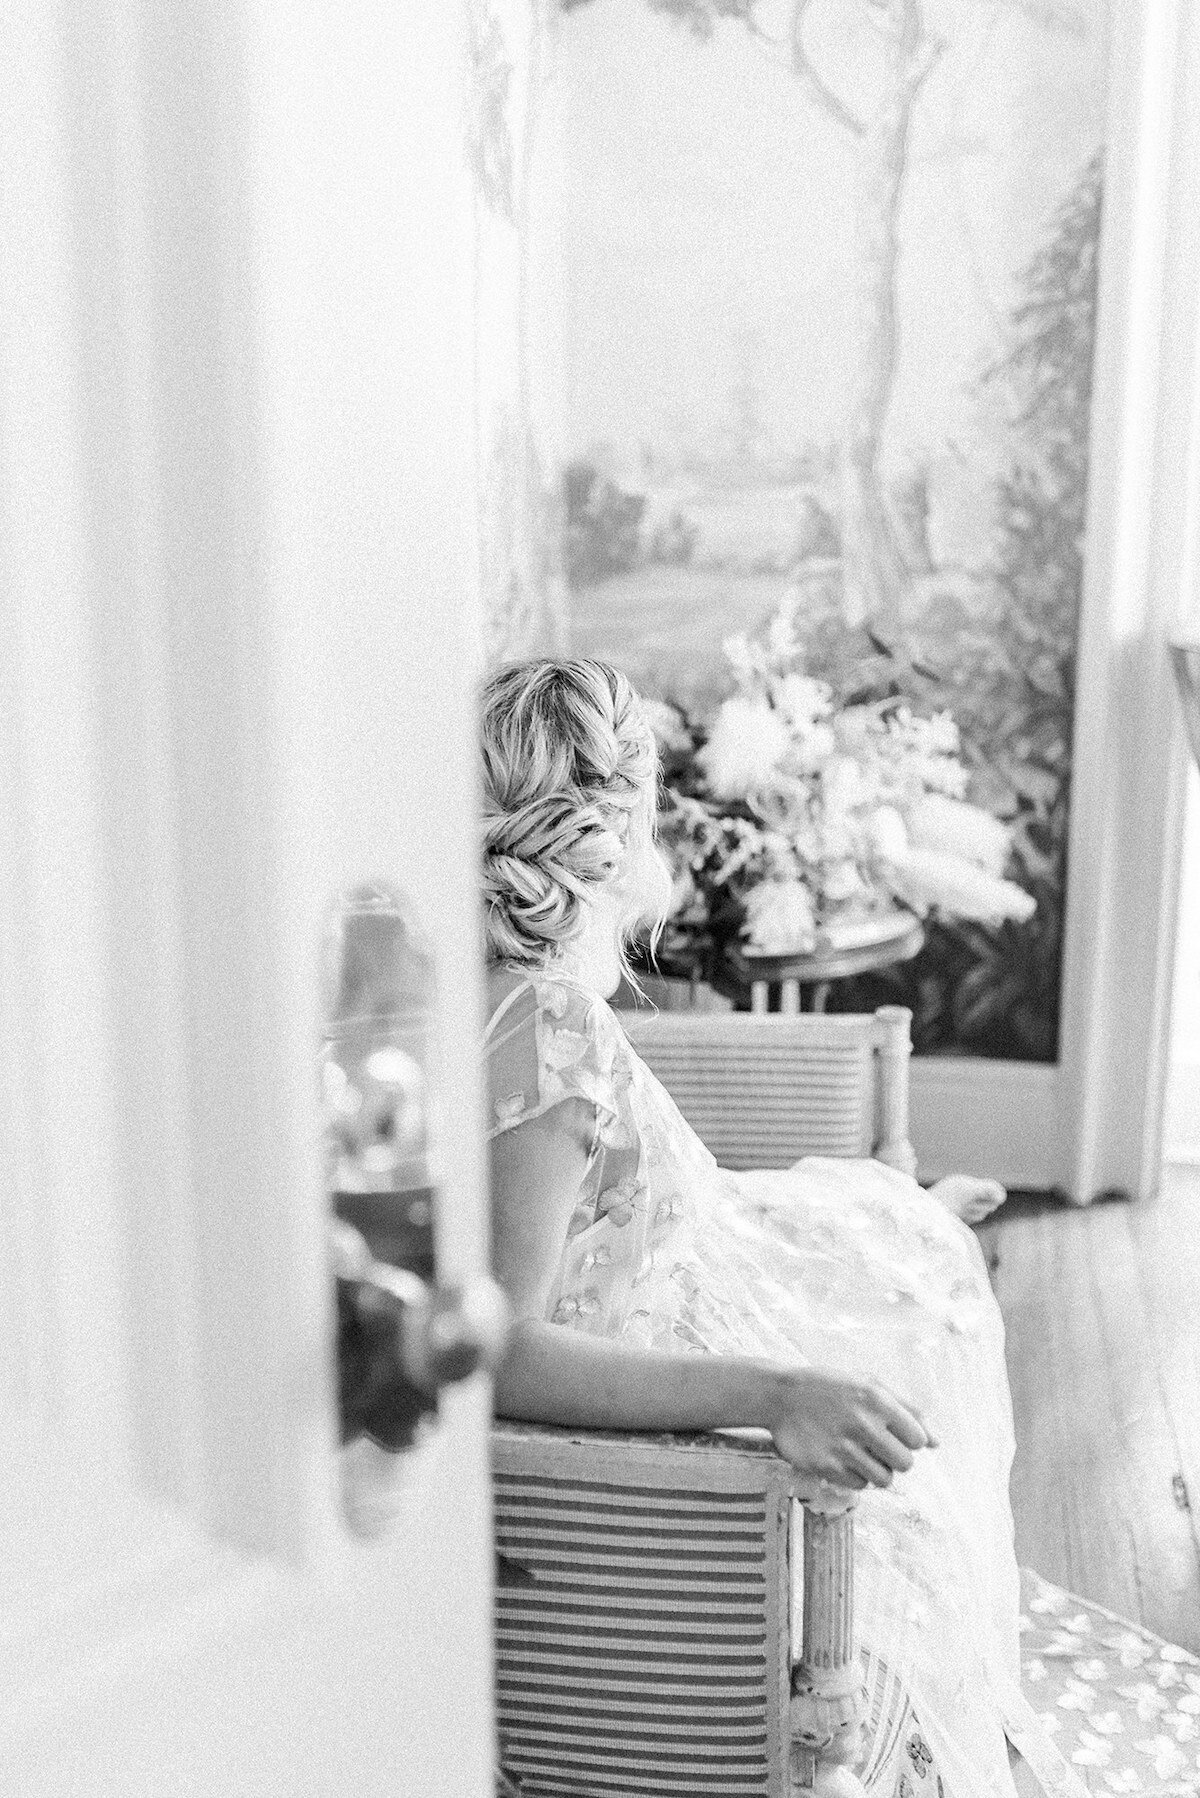 Step into a world of artful visions with our couture bridal photography. Each frame tells a story of high-end fashion, where creativity meets elegance in every stitch and design.